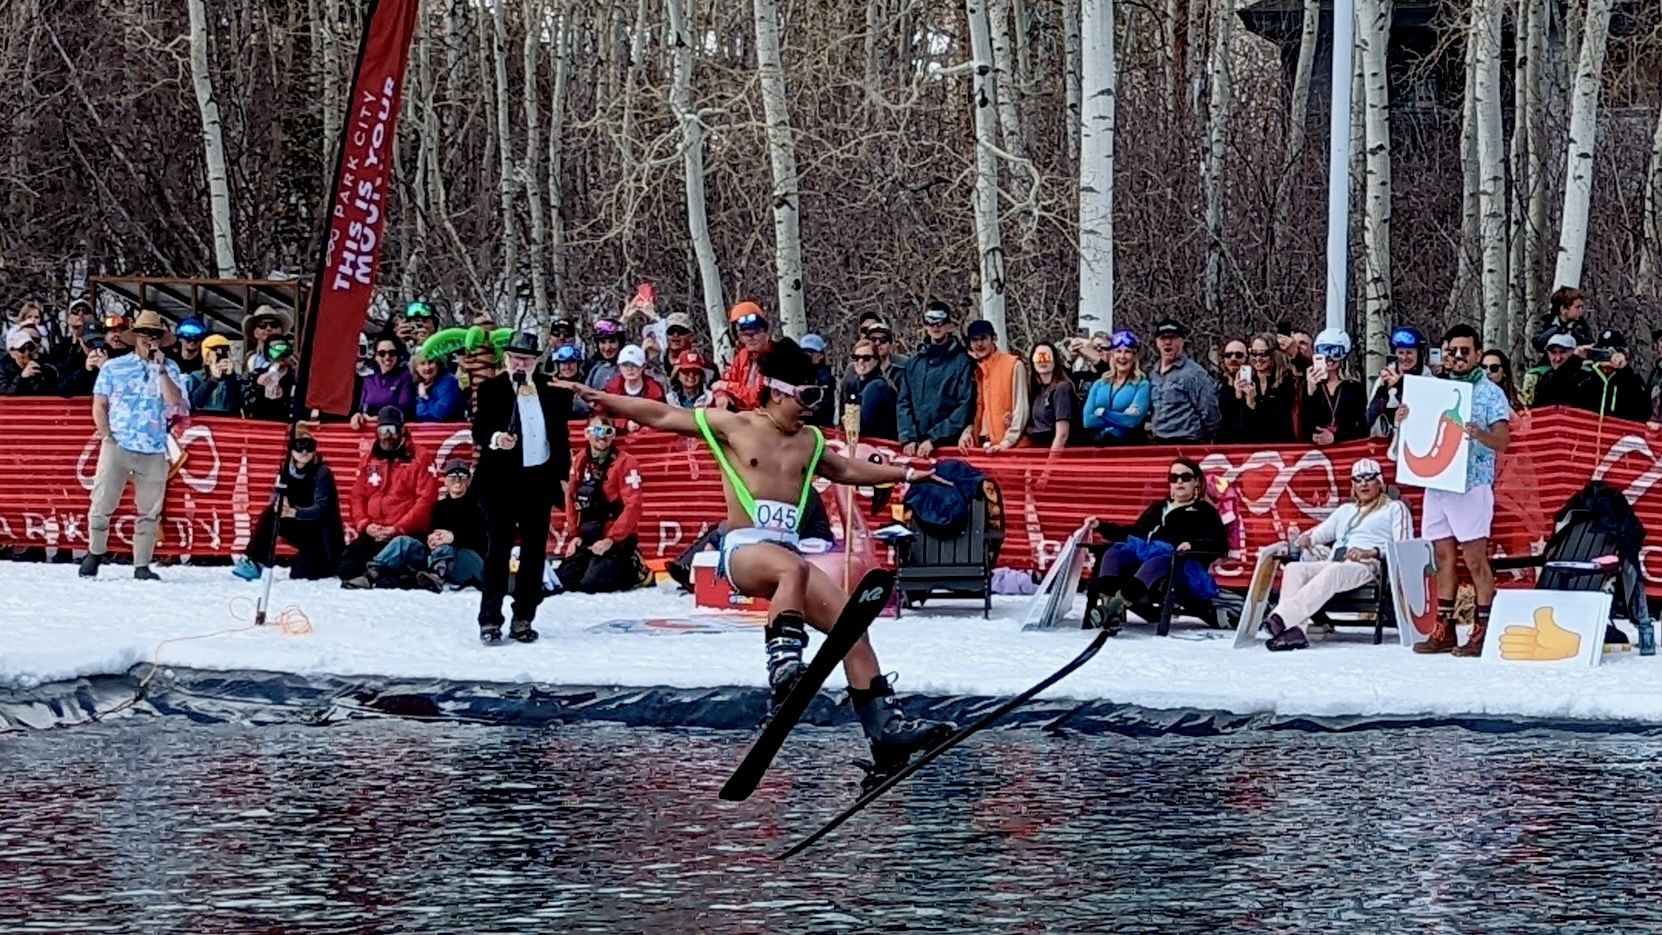 A man in suspenders ski-jumps into a pond.